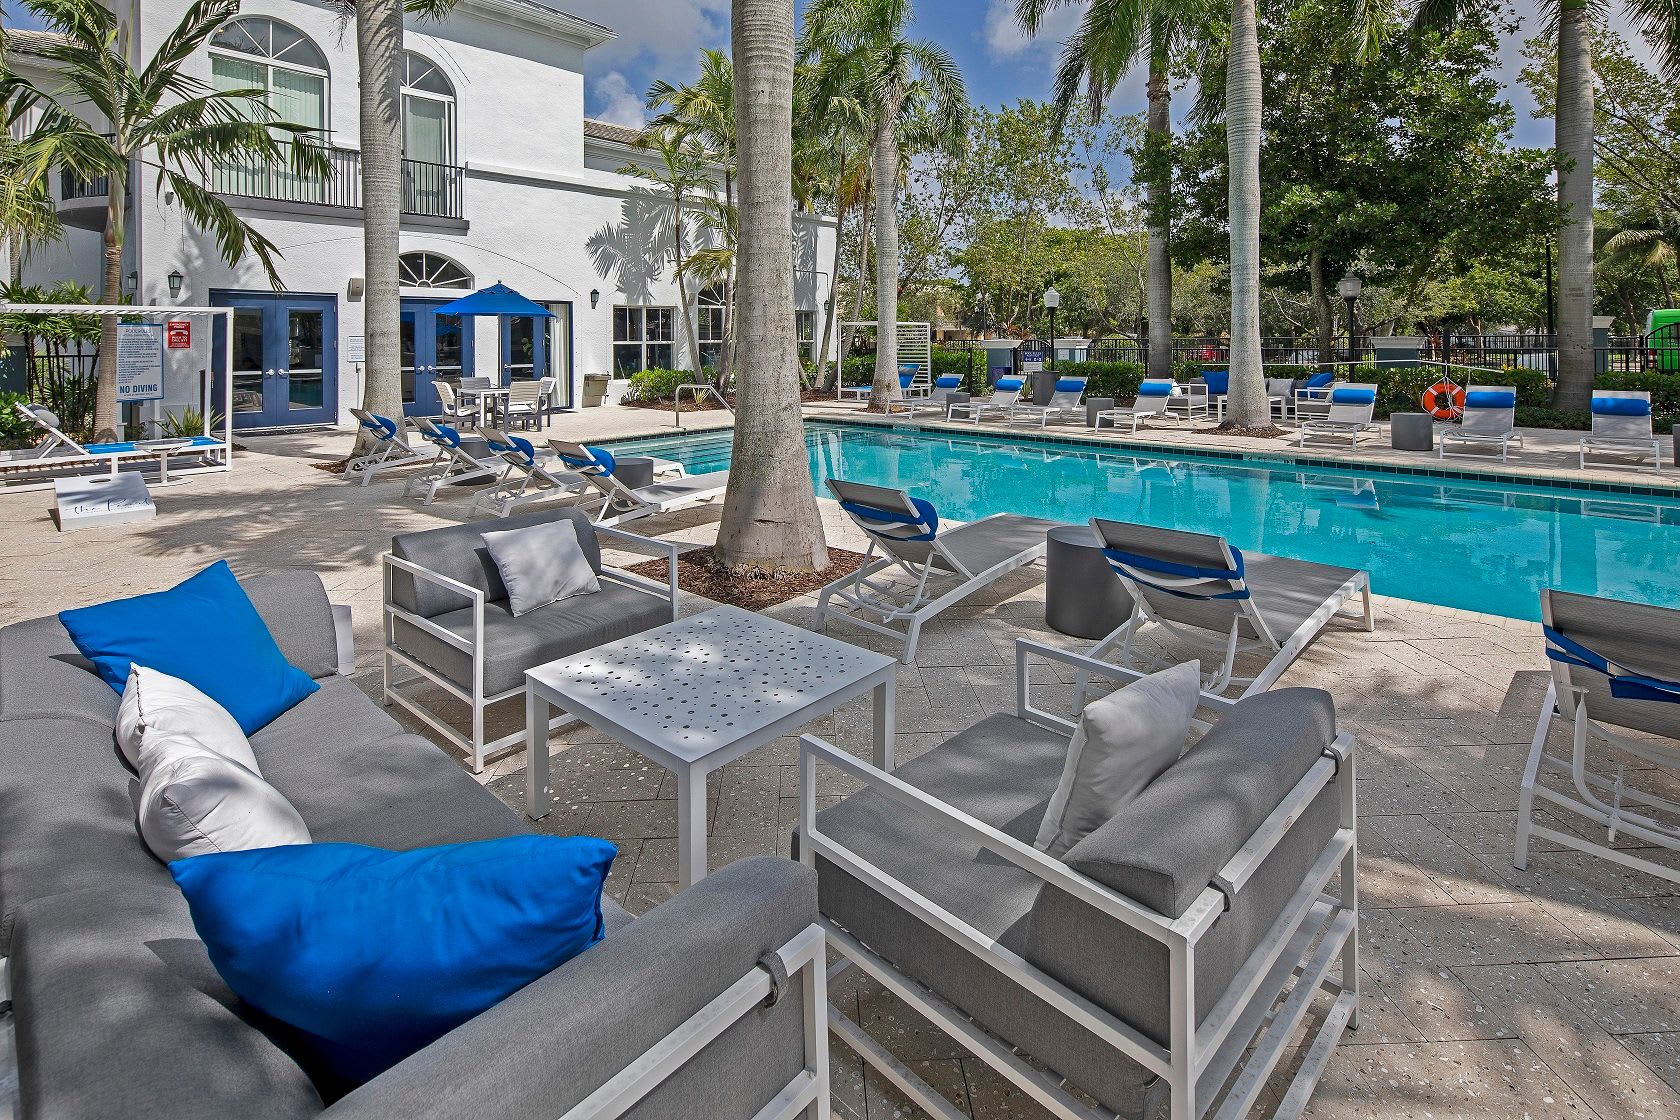 Refreshing pool with tons of seating around for friends at The Pearl in Ft Lauderdale, Florida